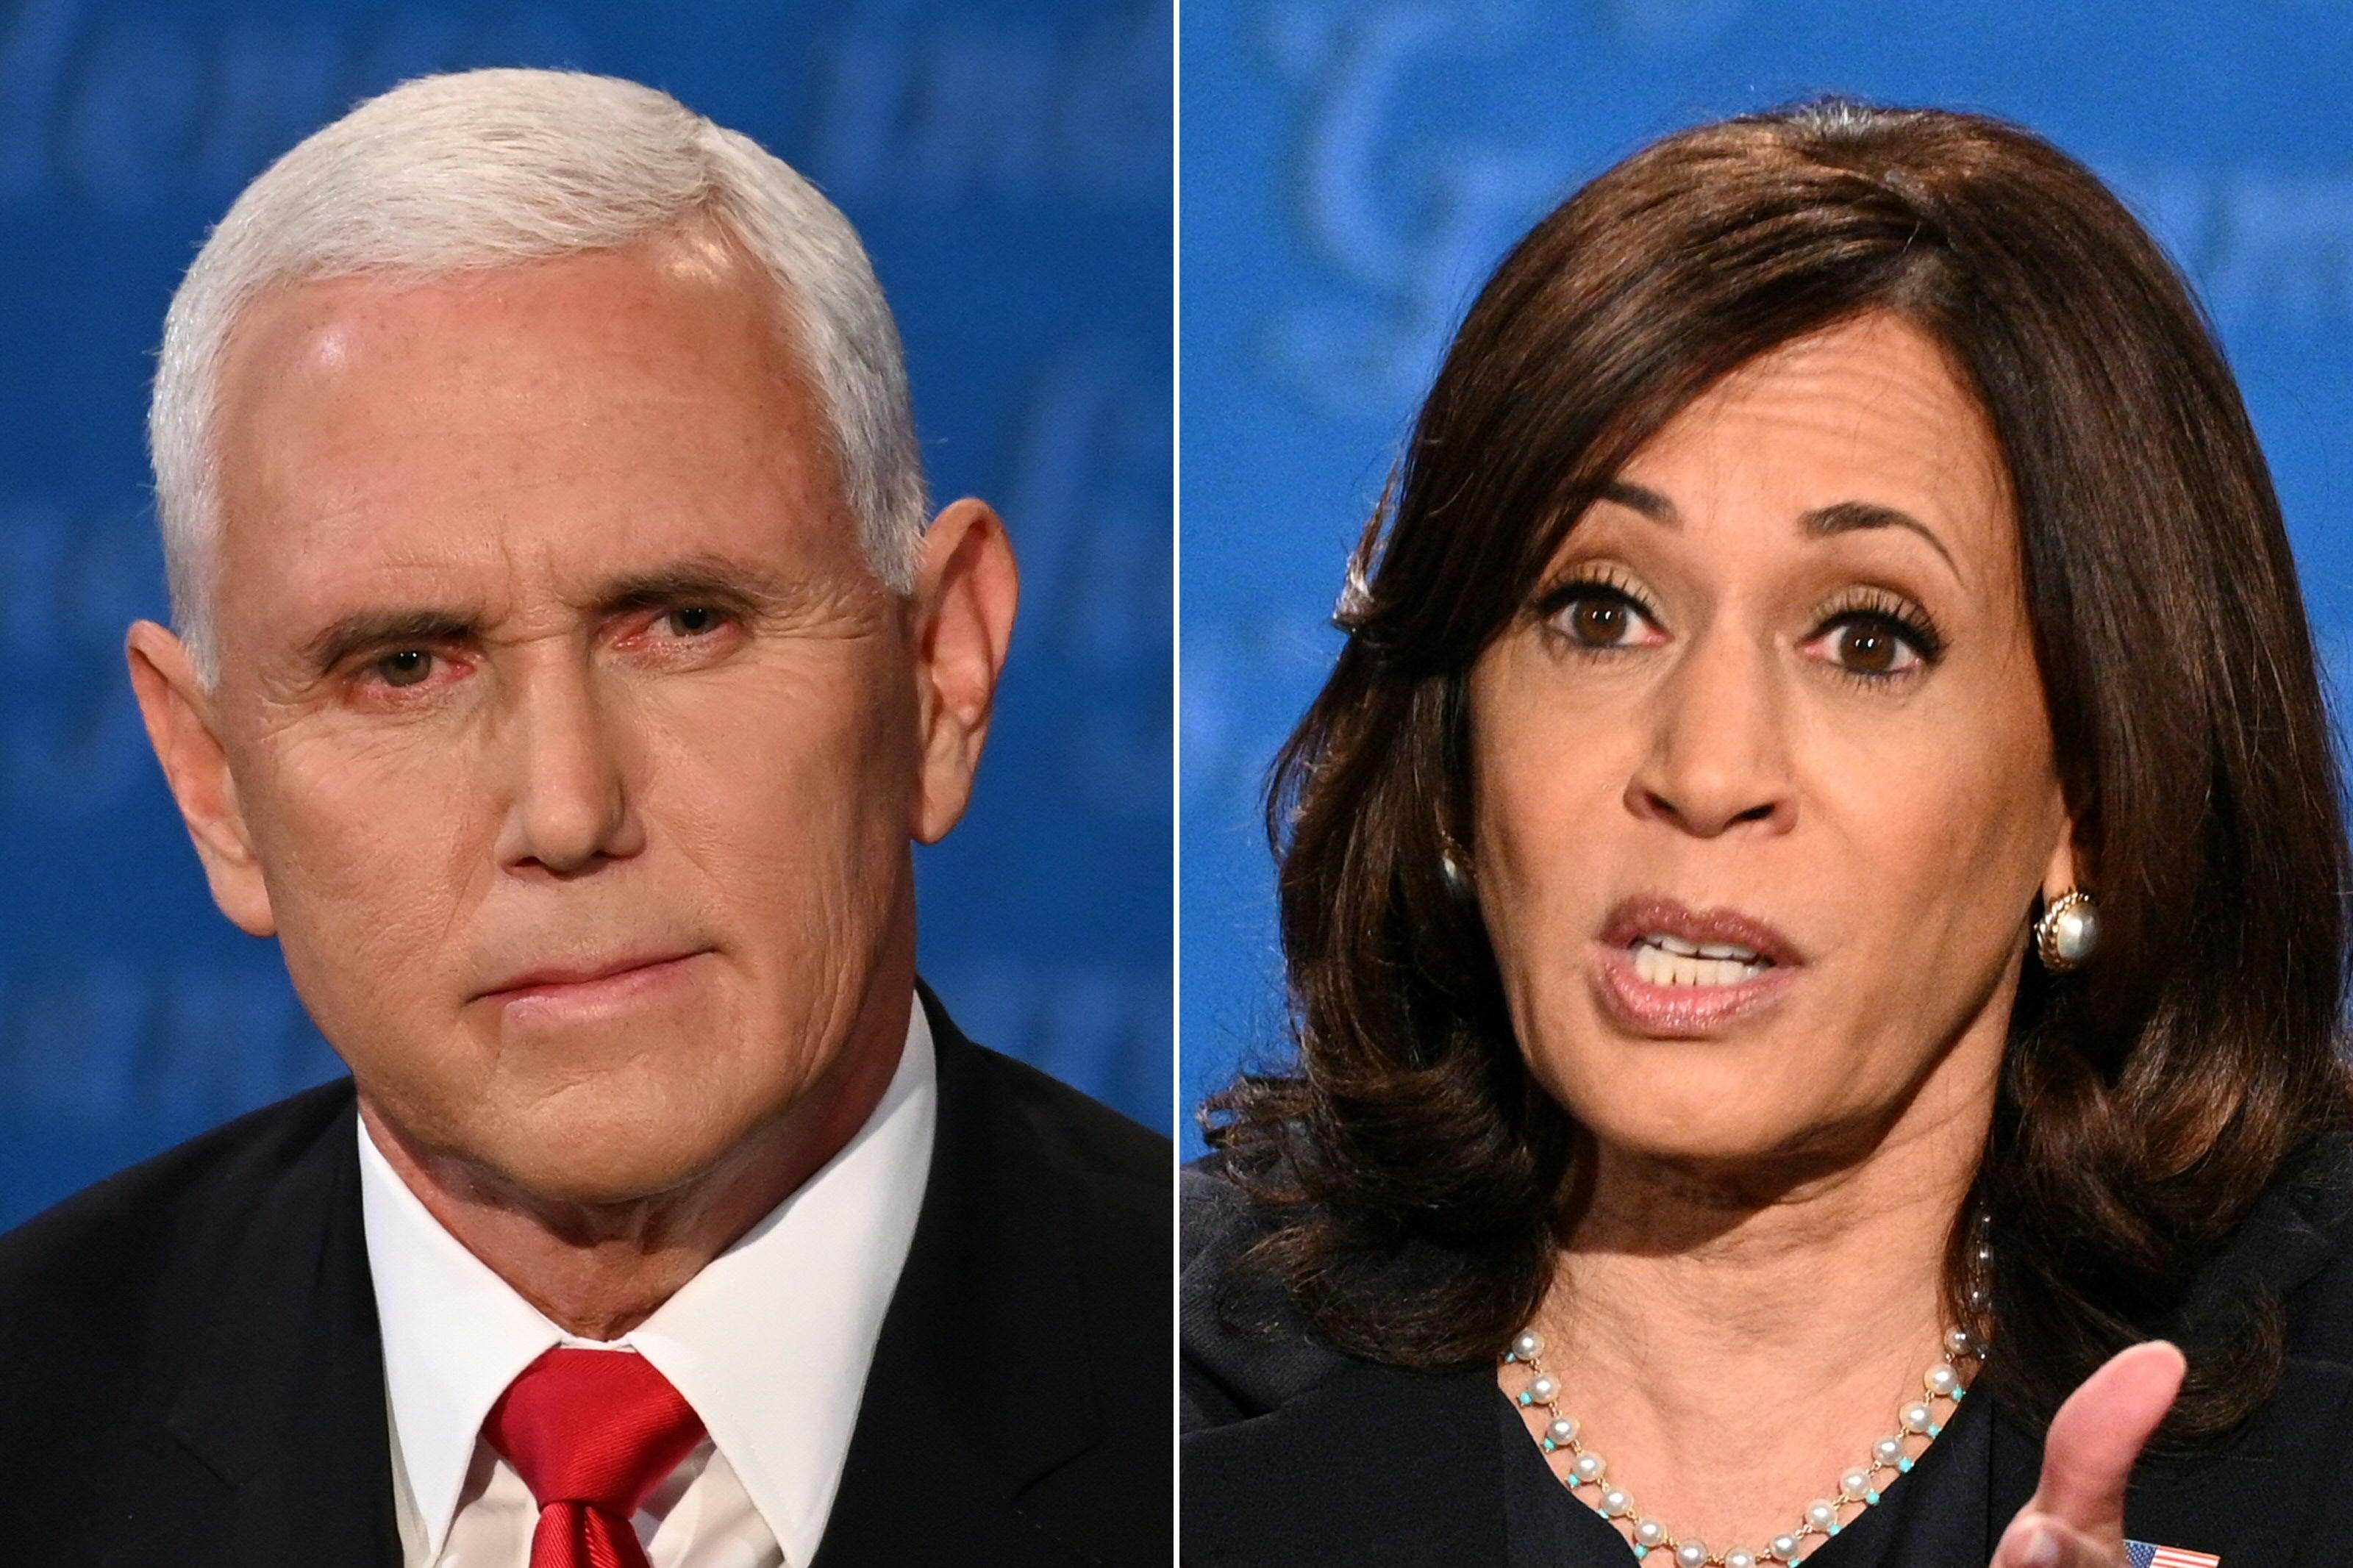 Mike Pence stares straight ahead with a grim look on his face. Kamala Harris gestures with her hands while speaking, her eyebrows raised.